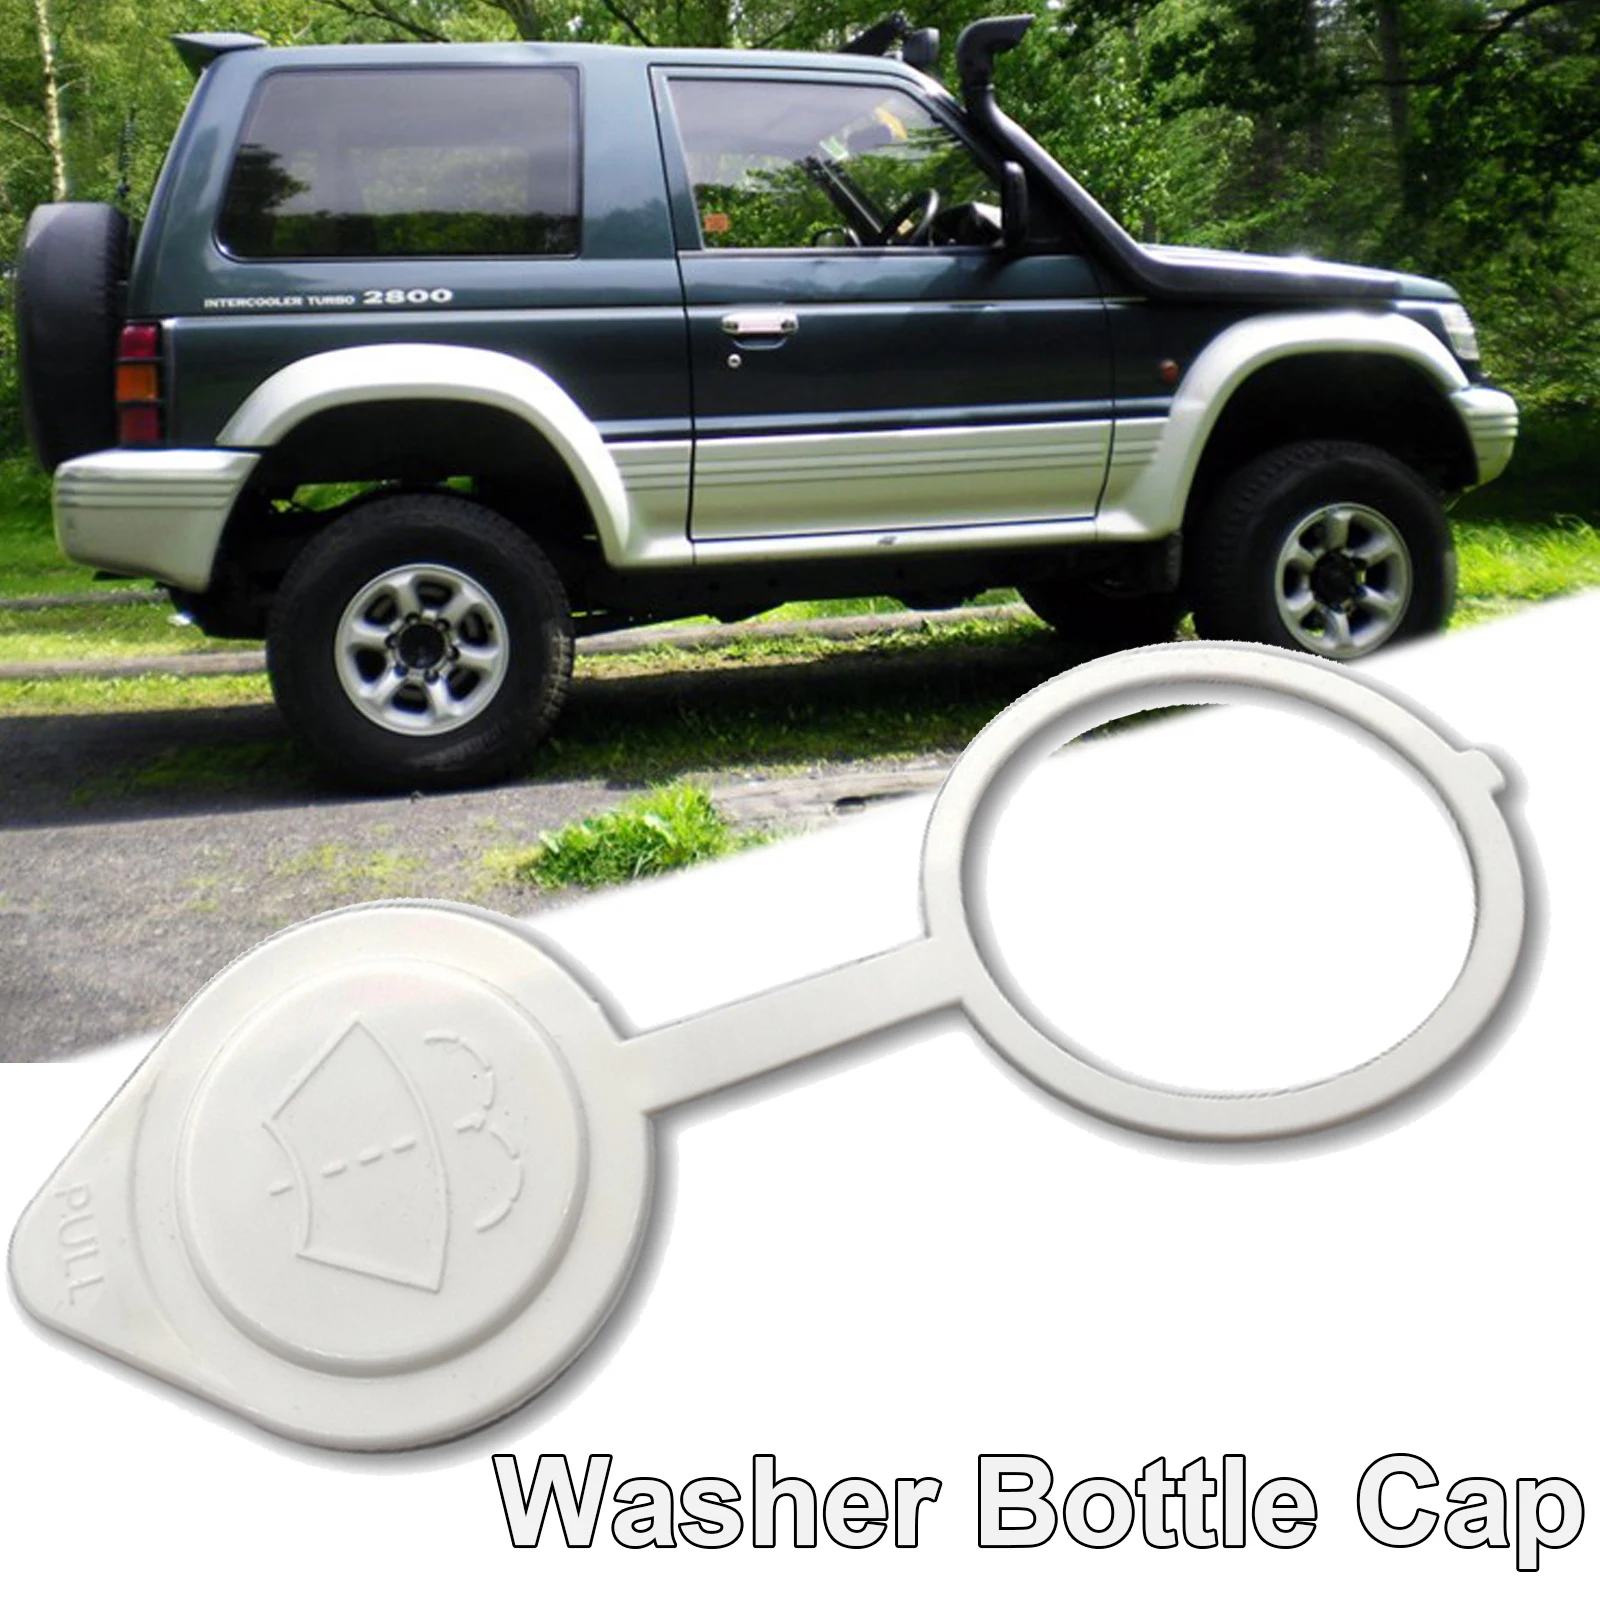 

Car Reservoir Cover Windshield Wiper Washer Tank Bottle Cap Lid Fluid Nozzle Cap For Mitsubishi Pajero Мицубиси Паджеро 2 FTO